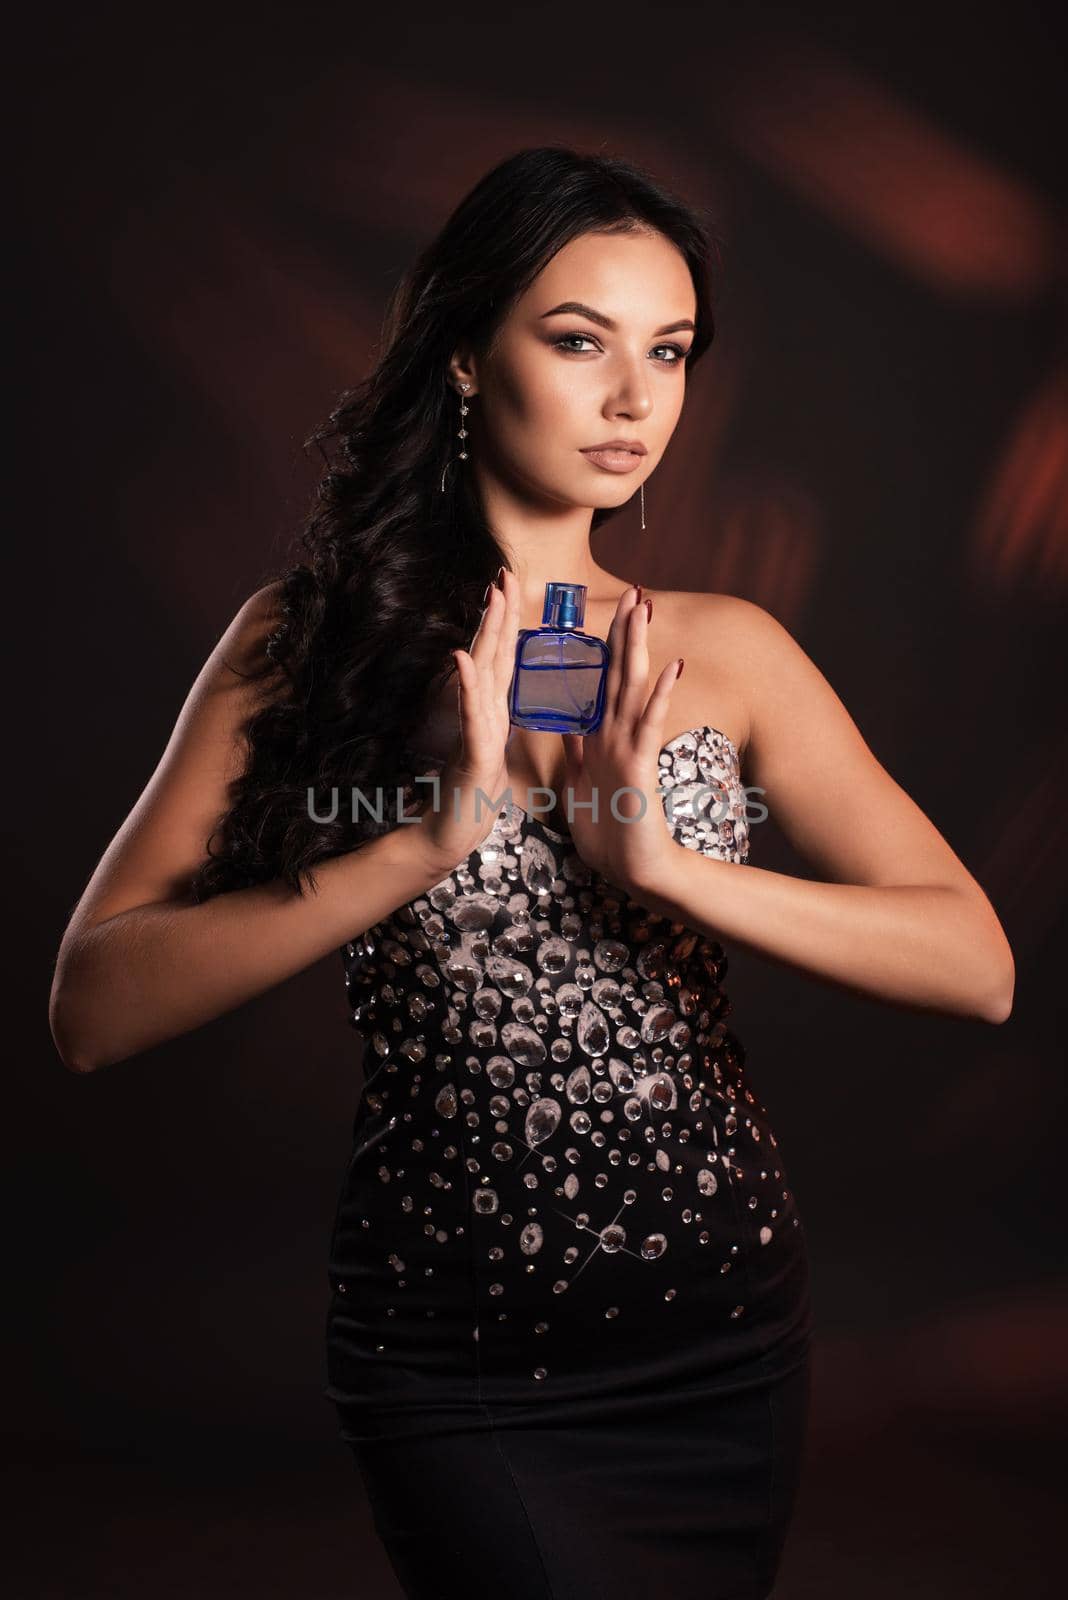 Beautiful young woman in a shiny dress with a bottle of perfume.